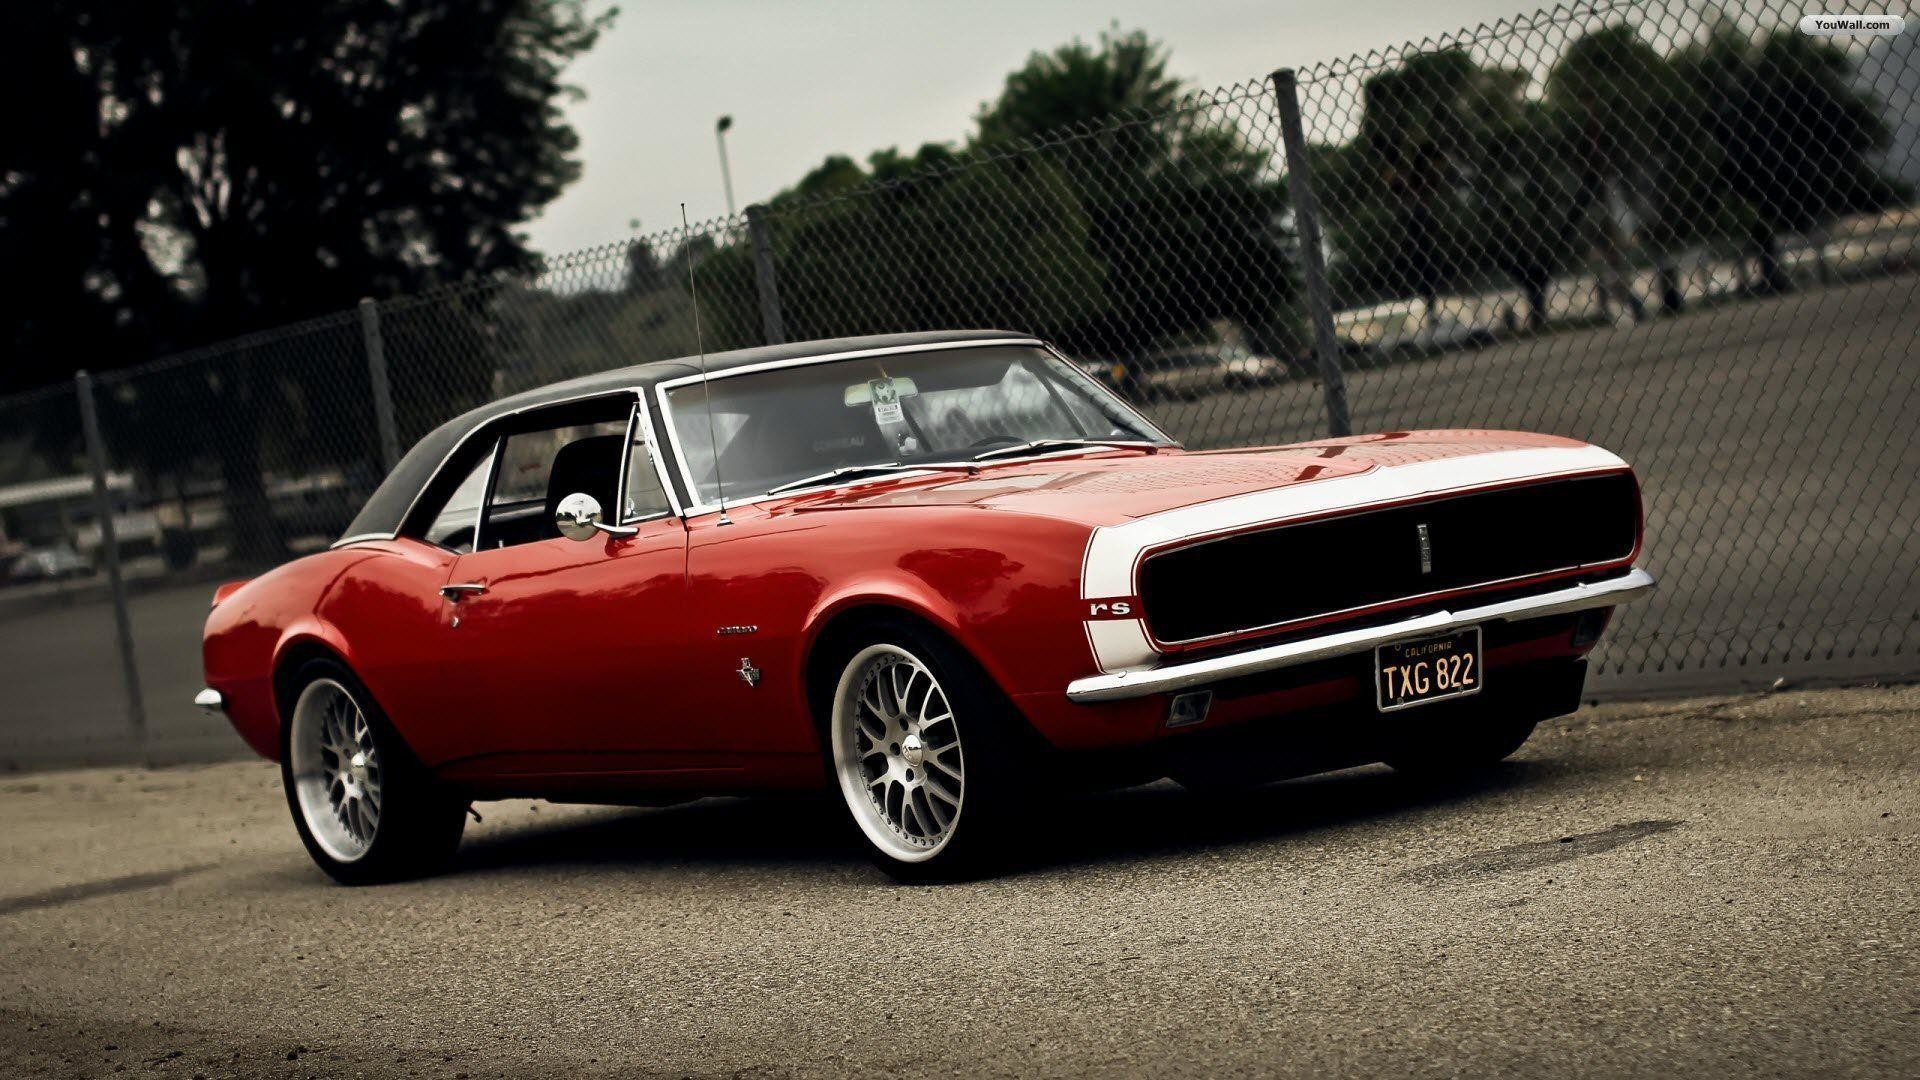 1920x1080 Desktop : Muscle Car Wallpapers Free Wallpaper Pictures Hd For .